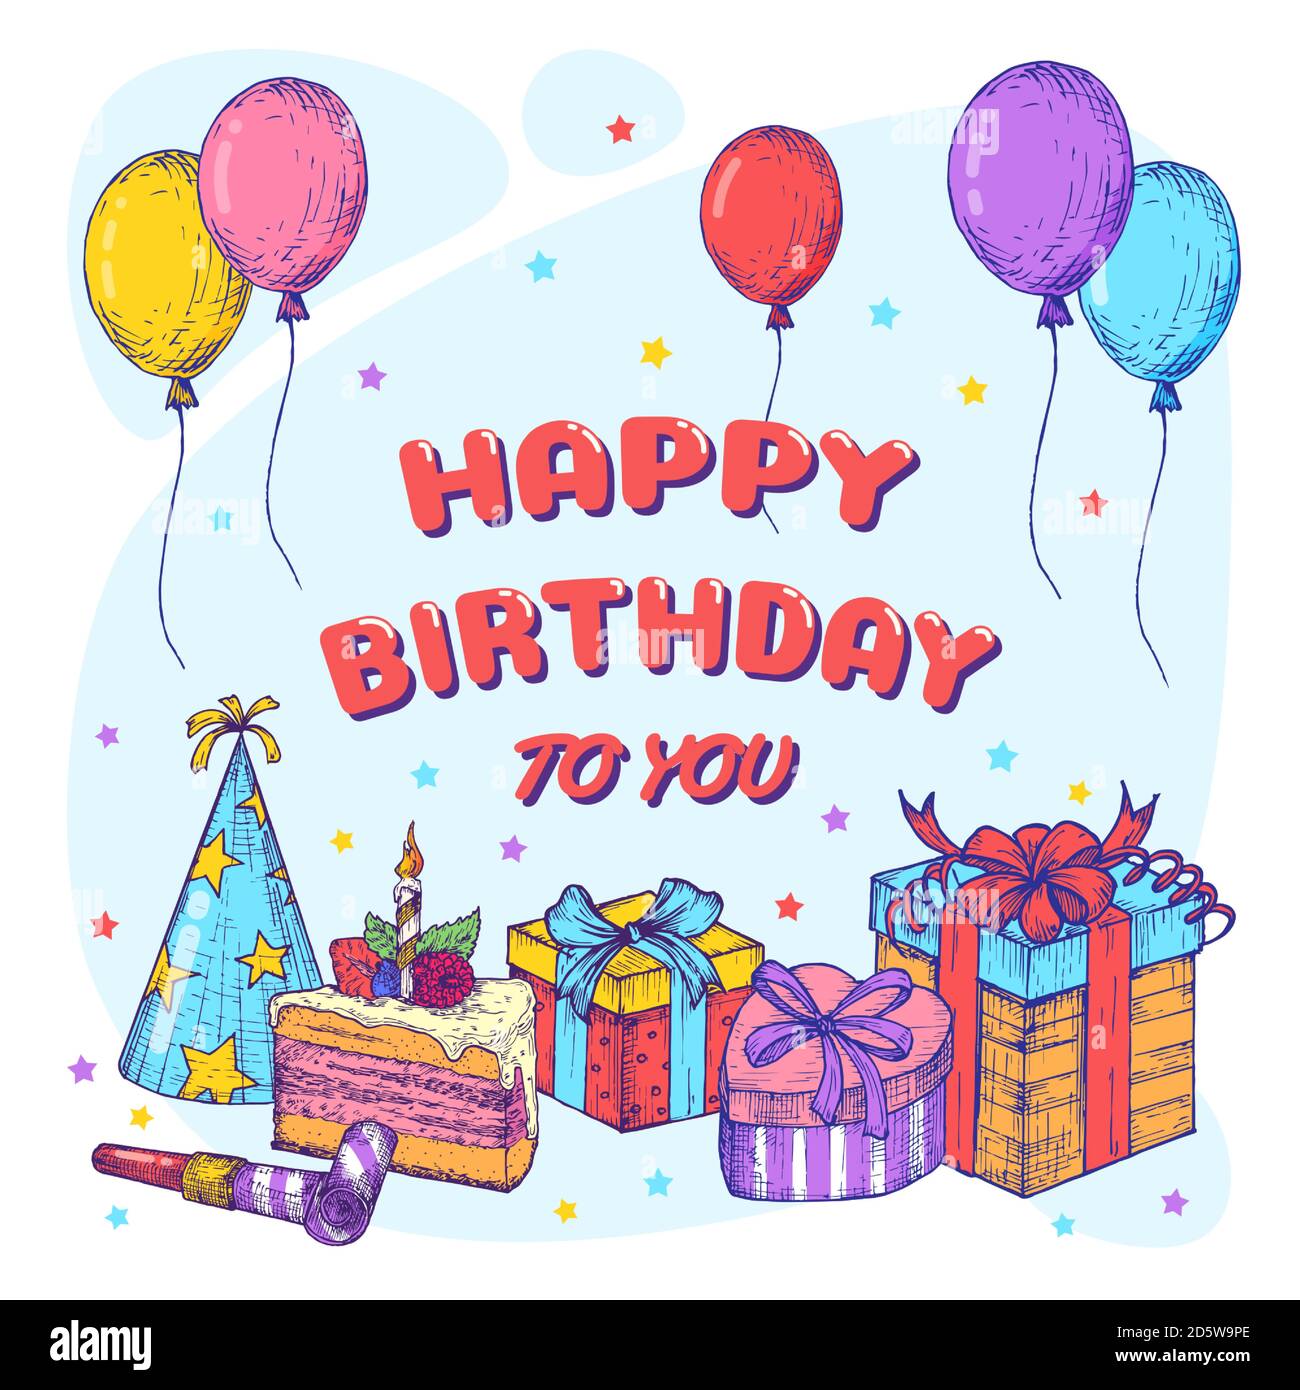 Happy Birthday Greeting Card Template. Hand Drawn Cake, Balloons and Gift Boxes Sketch Illustrations. Holiday Celebration Design Layout. Stock Vector